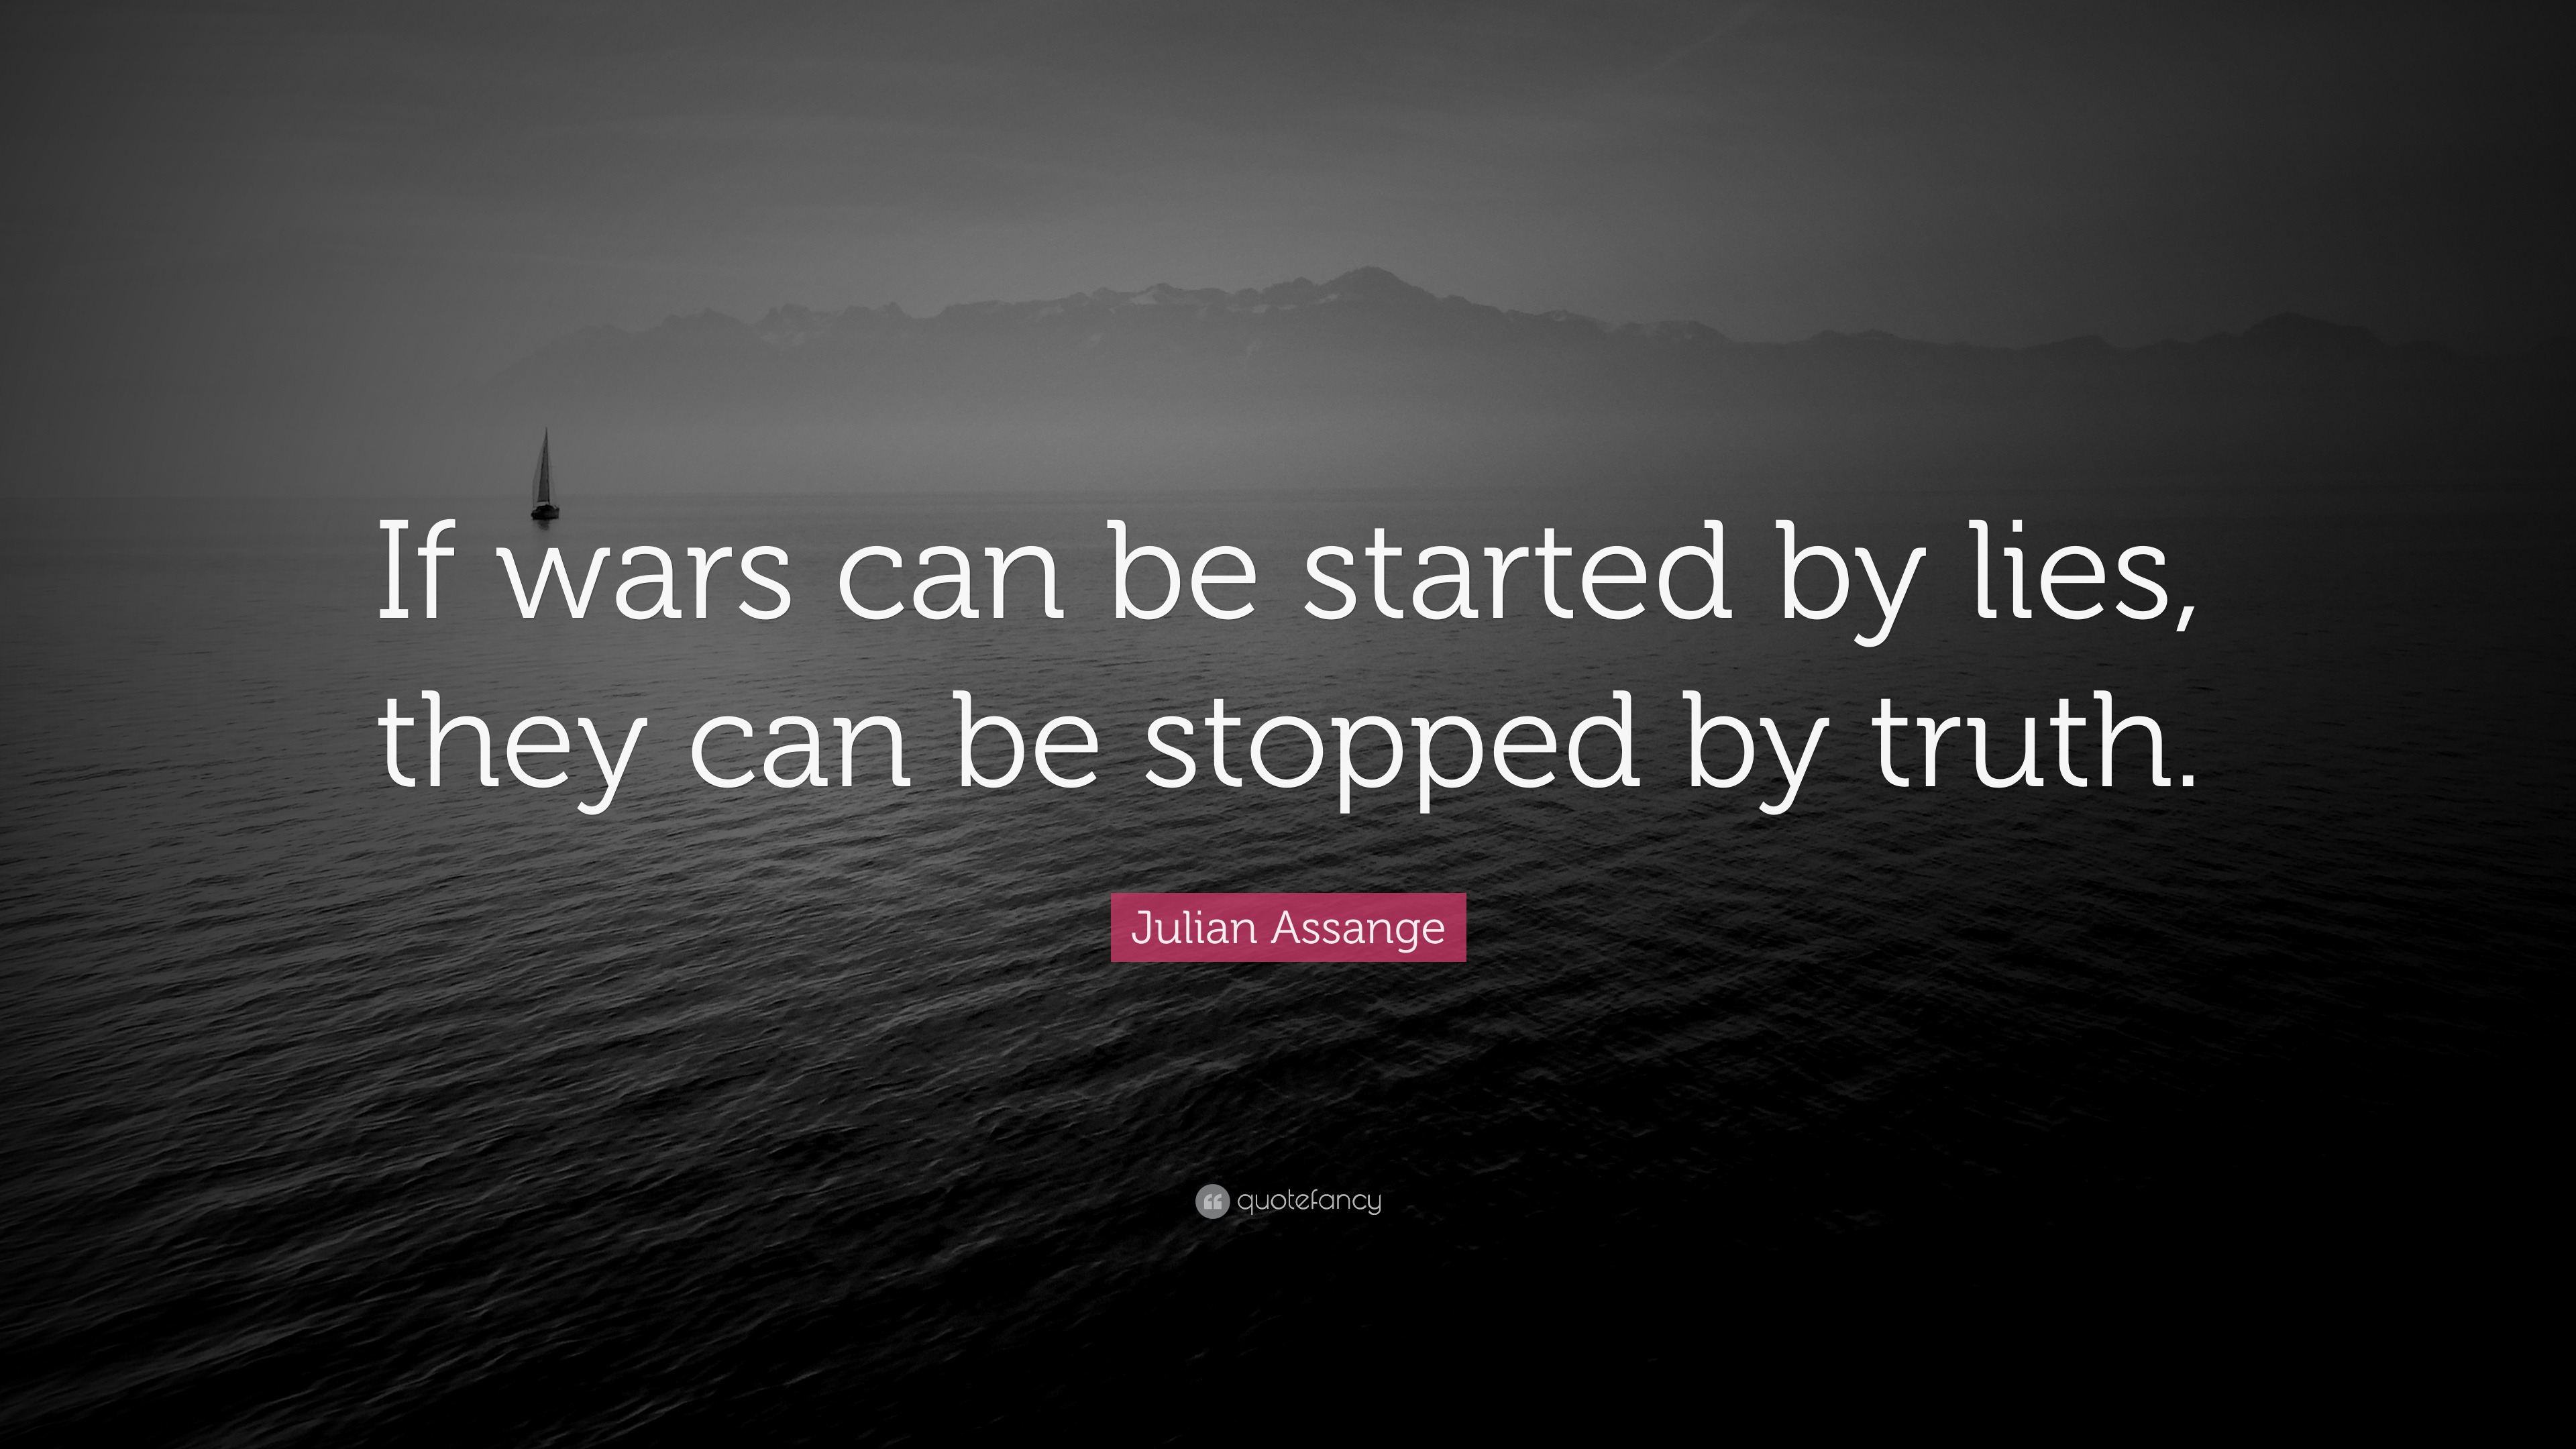 Julian Assange Quote: “If wars can be started by lies, they can be